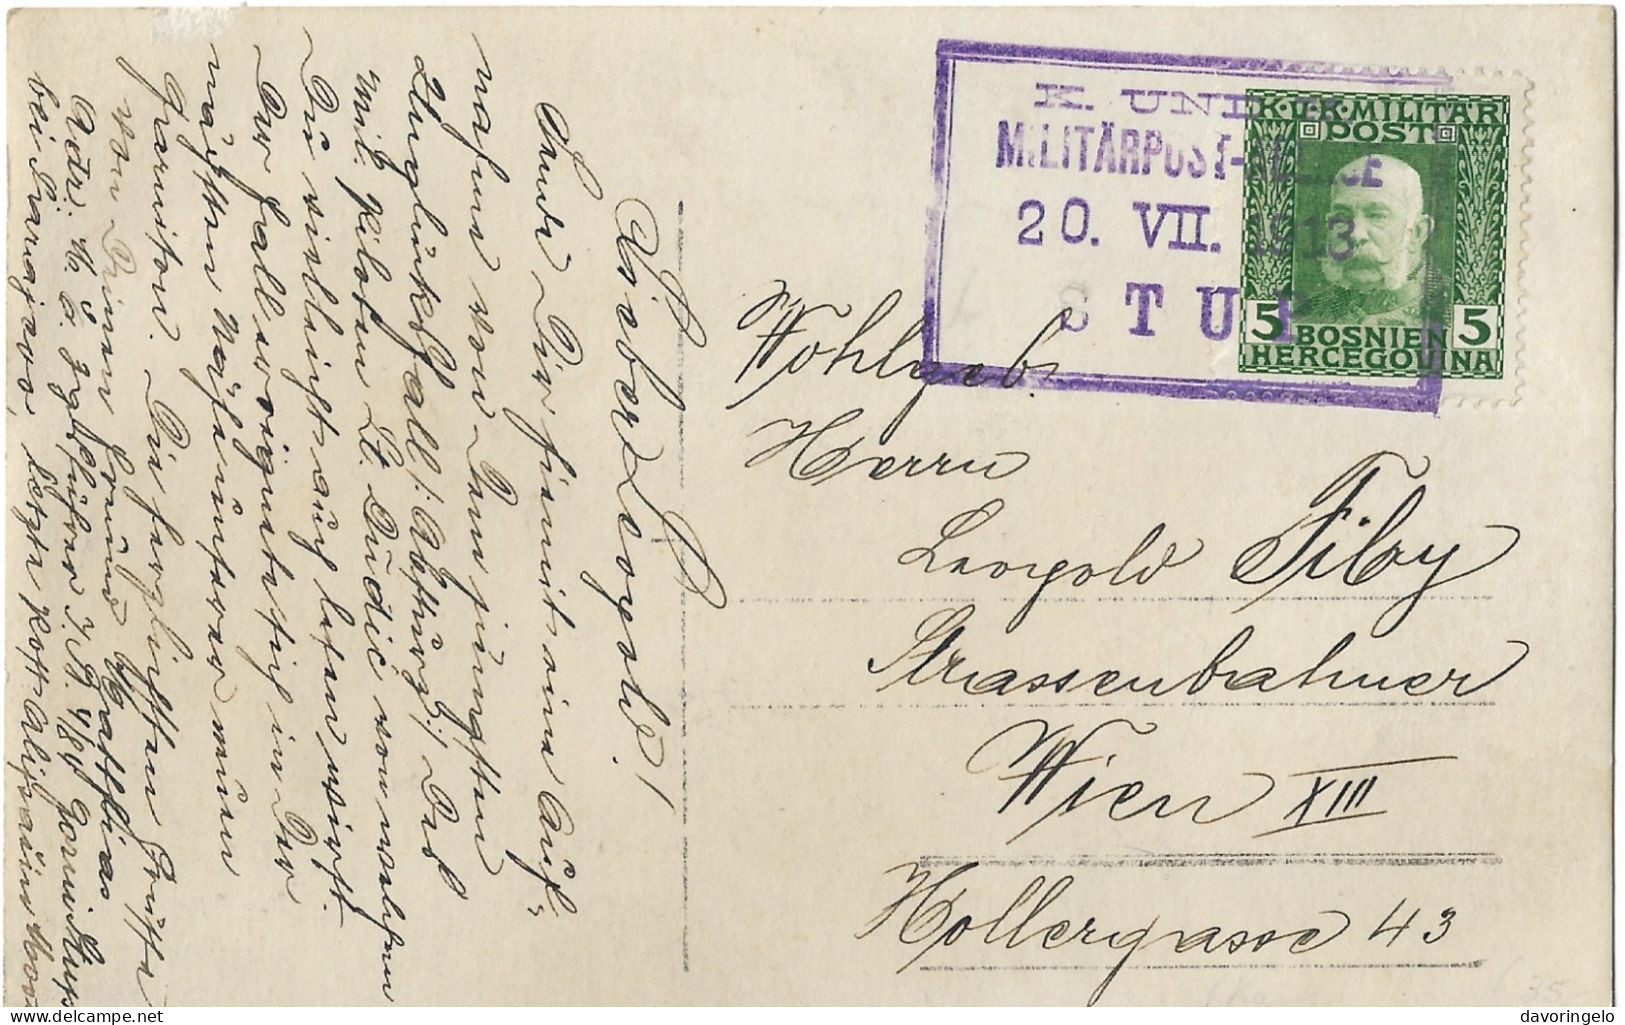 Bosnia-Herzegovina/Austria-Hungary, Picture Postcard-year 1913, Auxiliary Post Office/Ablage STUP, Type B1 (VIOLET) - Bosnia And Herzegovina